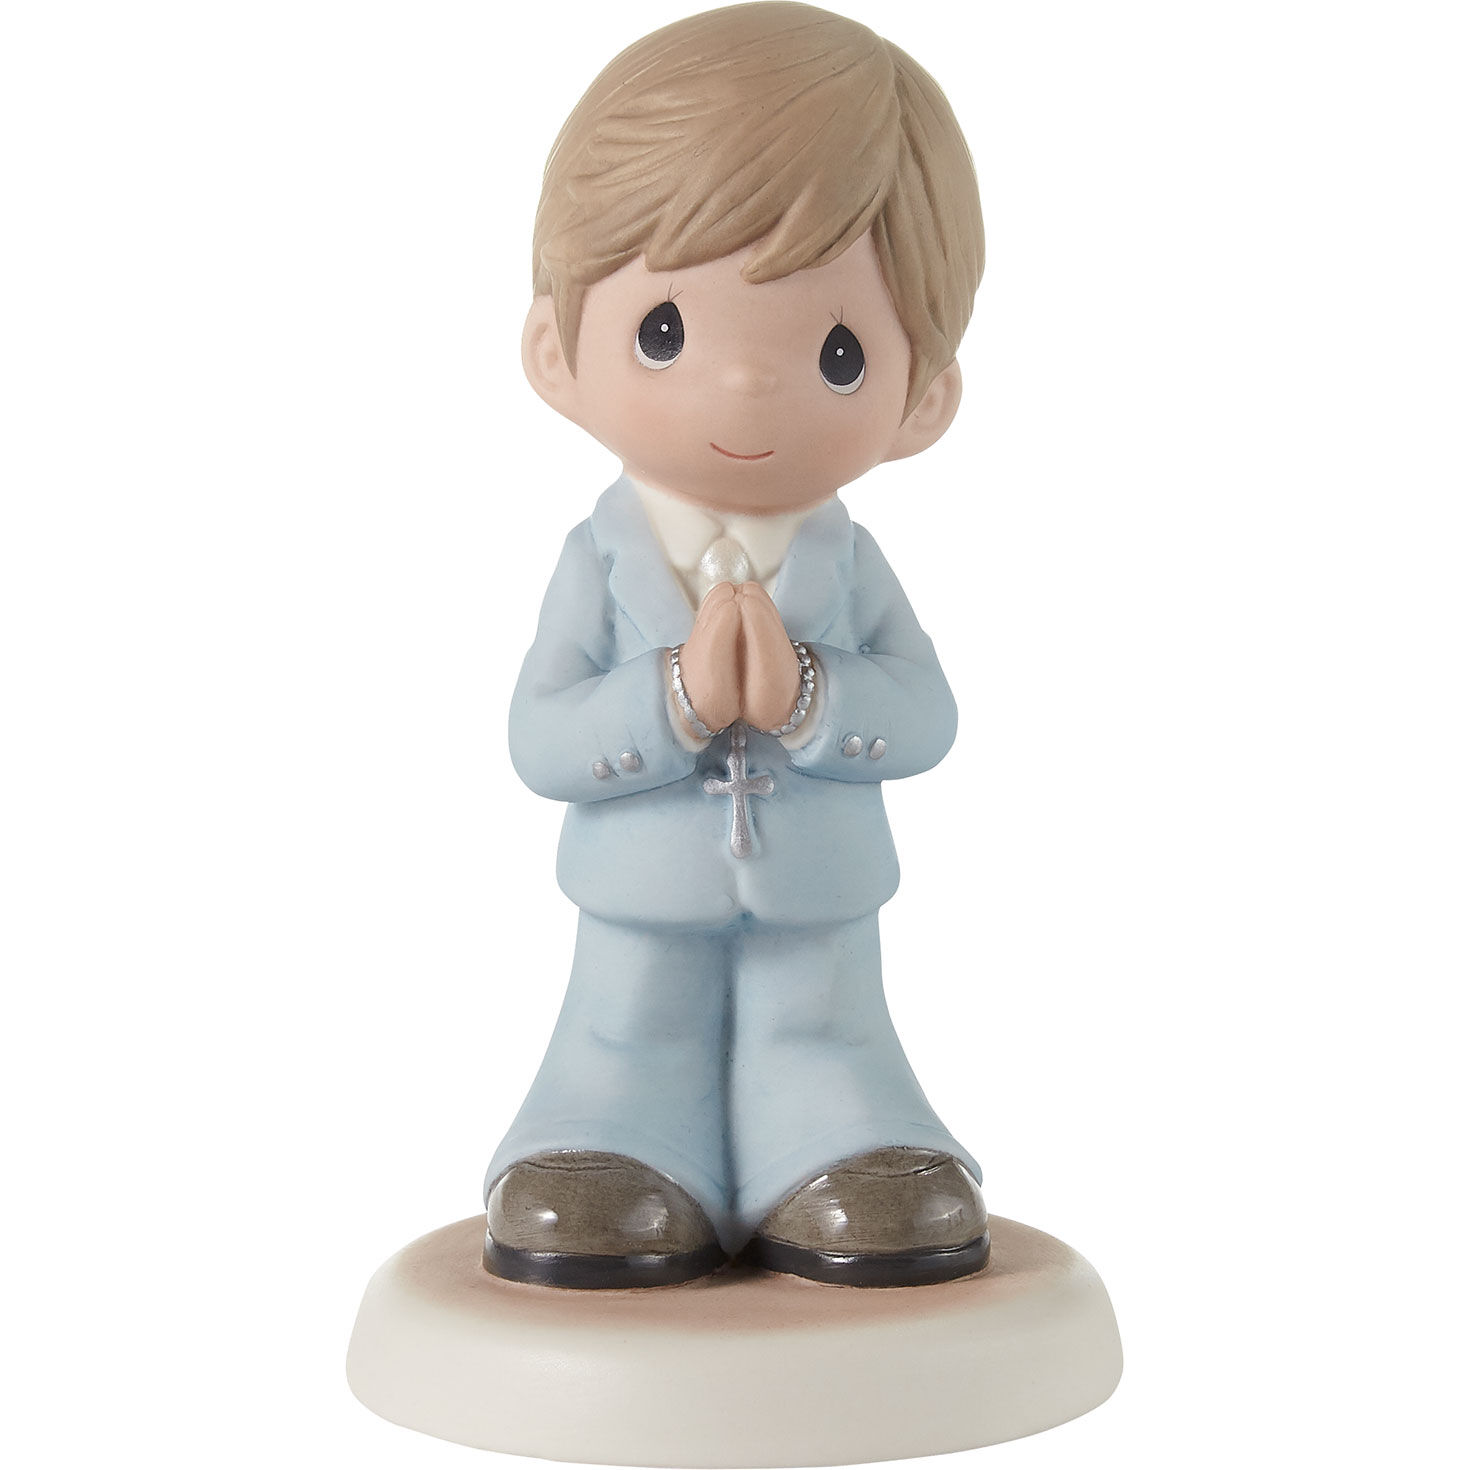 Precious Moments Blessings On Your First Communion Brunette Boy Figurine, 5.3" for only USD 49.99 | Hallmark